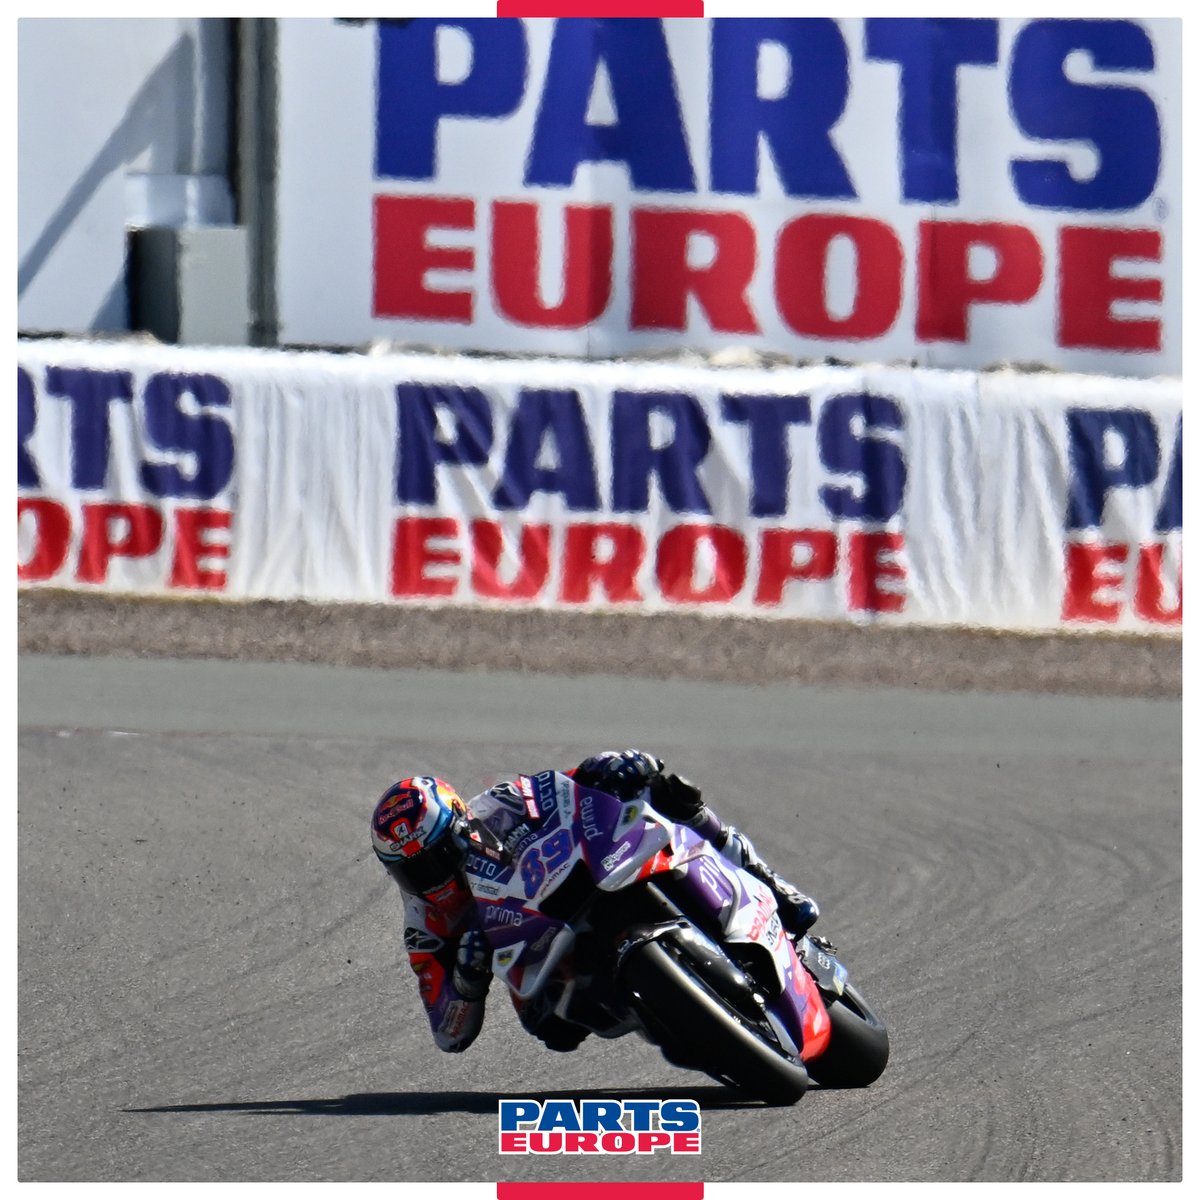 89 hours to go and the action starts back in - motoGP FP1 is coming up in Silverstone for Jorge Martin #89 and the rest of the pack! 

#pramacracing #motogp #MotoGP2022 @motogp   #wesupportthesport #partseurope #forzamartin89 #jorgemartin89